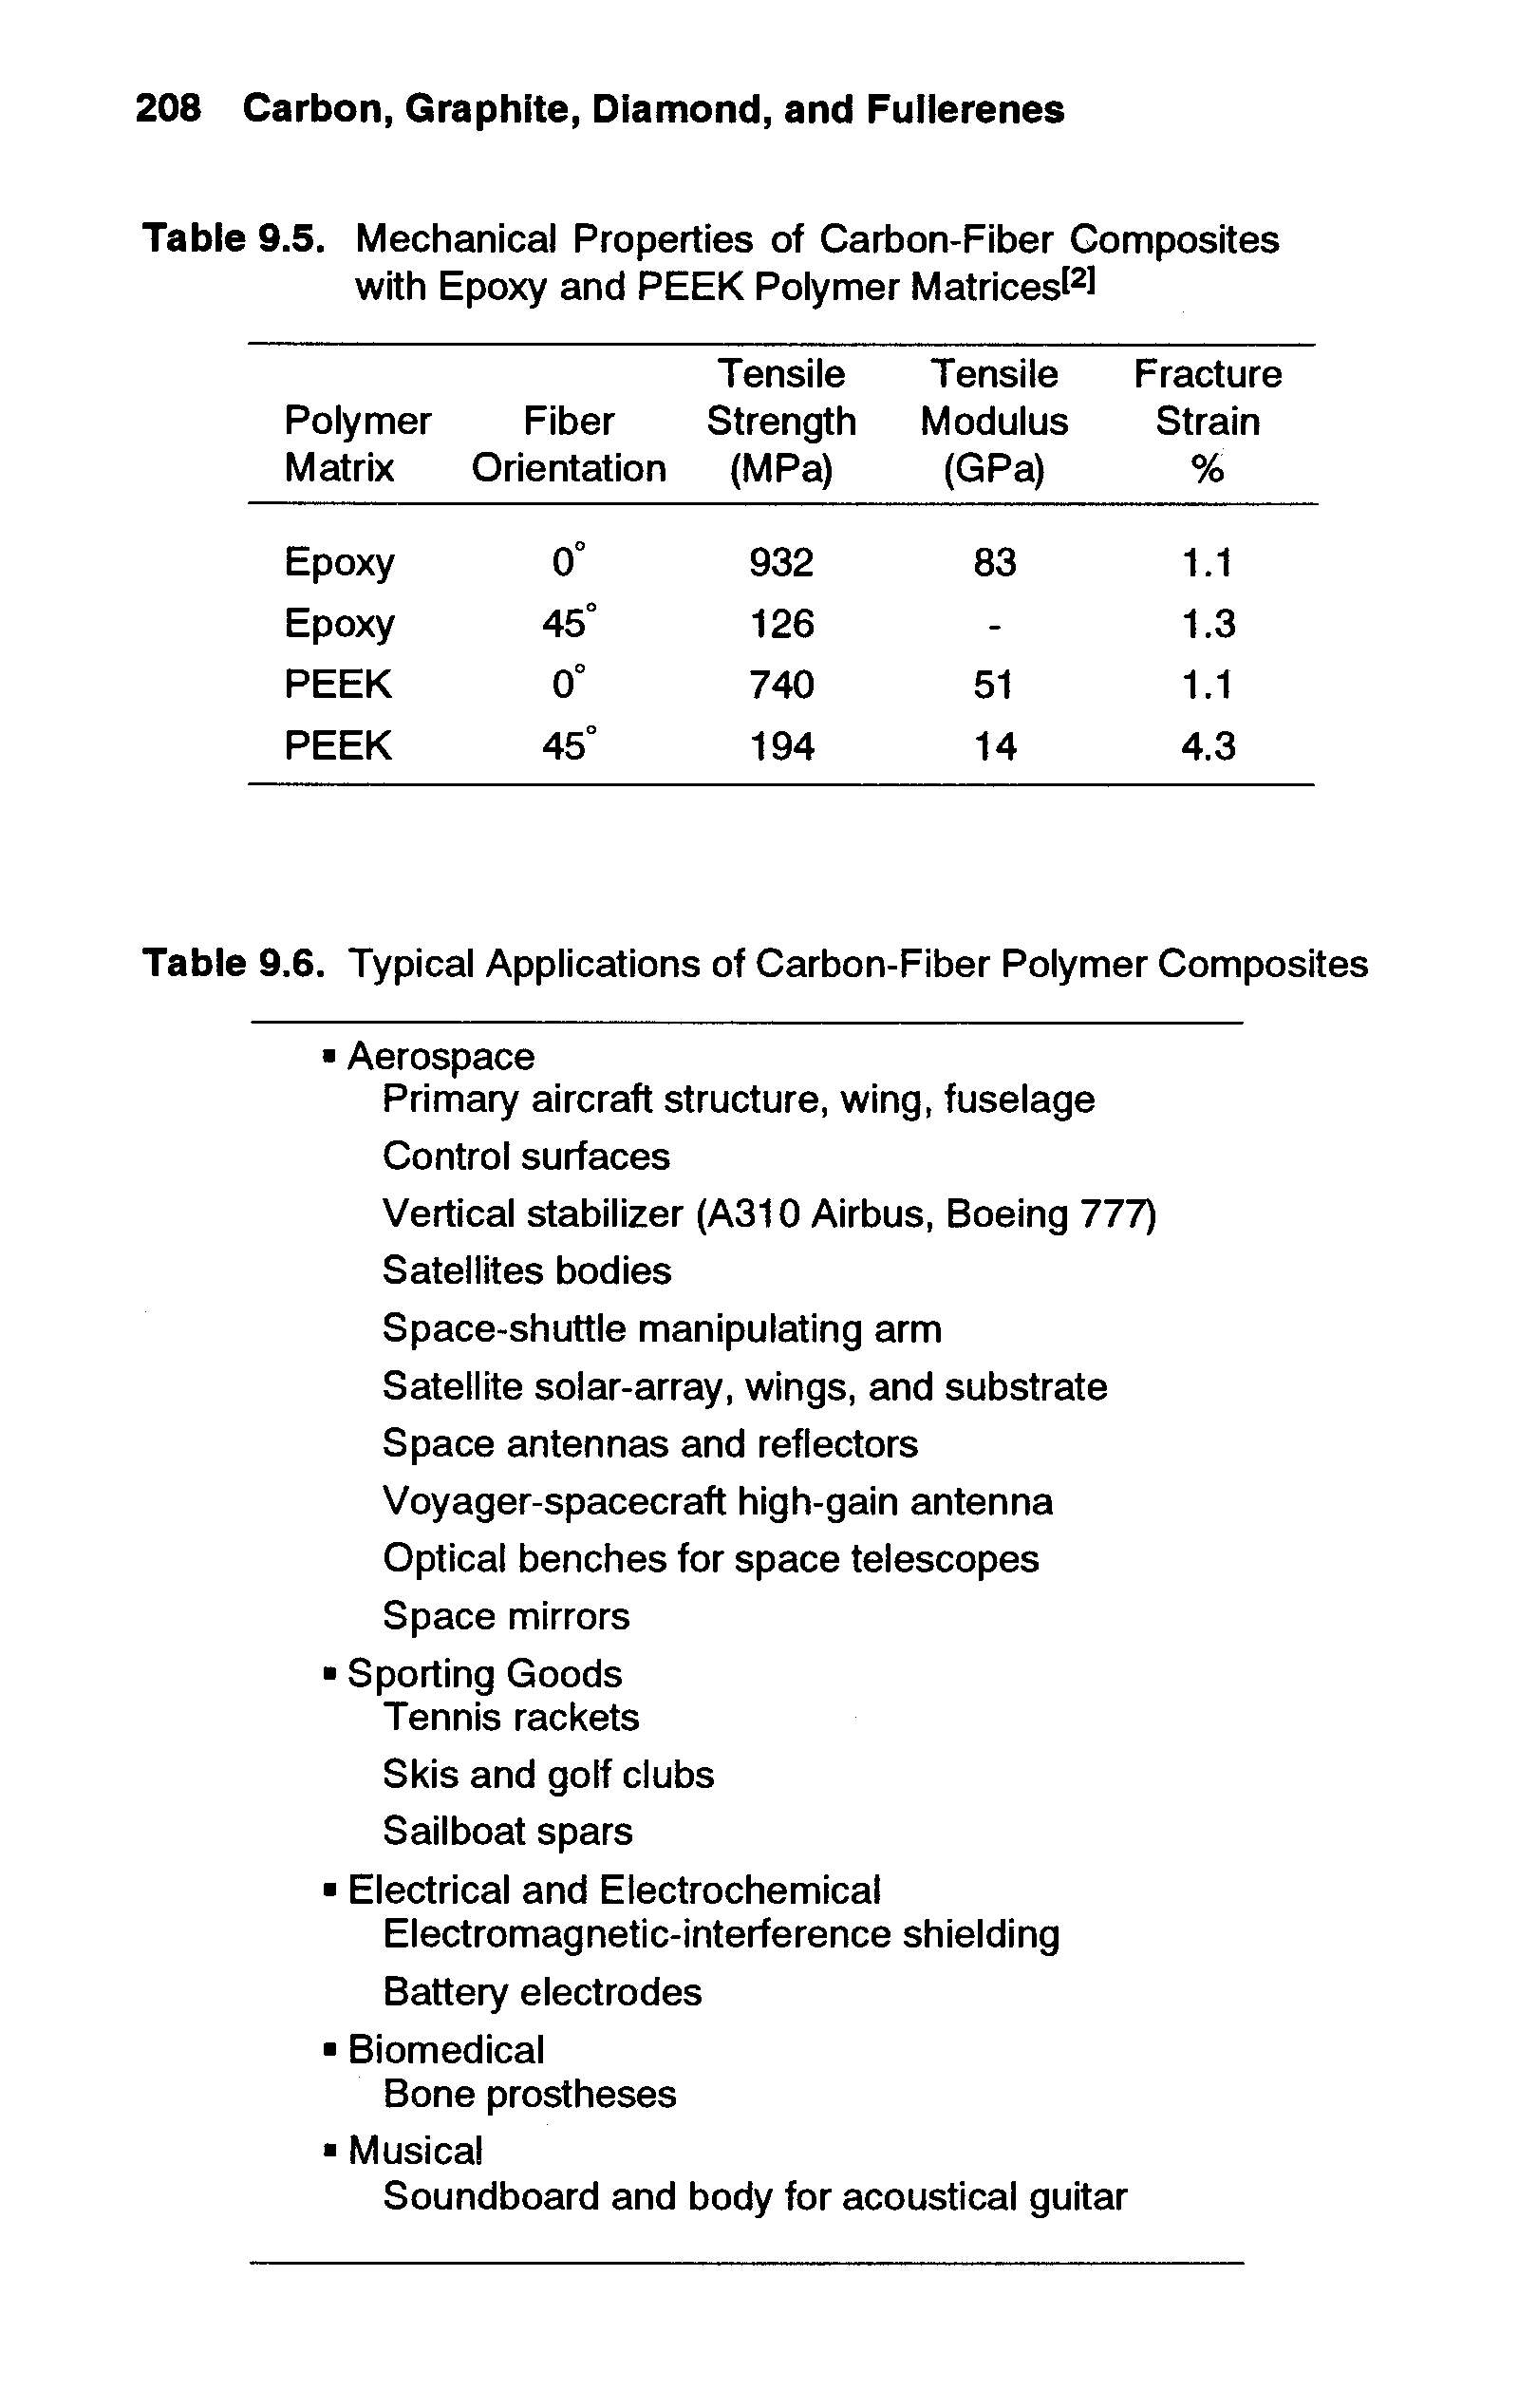 Table 9.6. Typical Applications of Carbon-Fiber Polymer Composites...